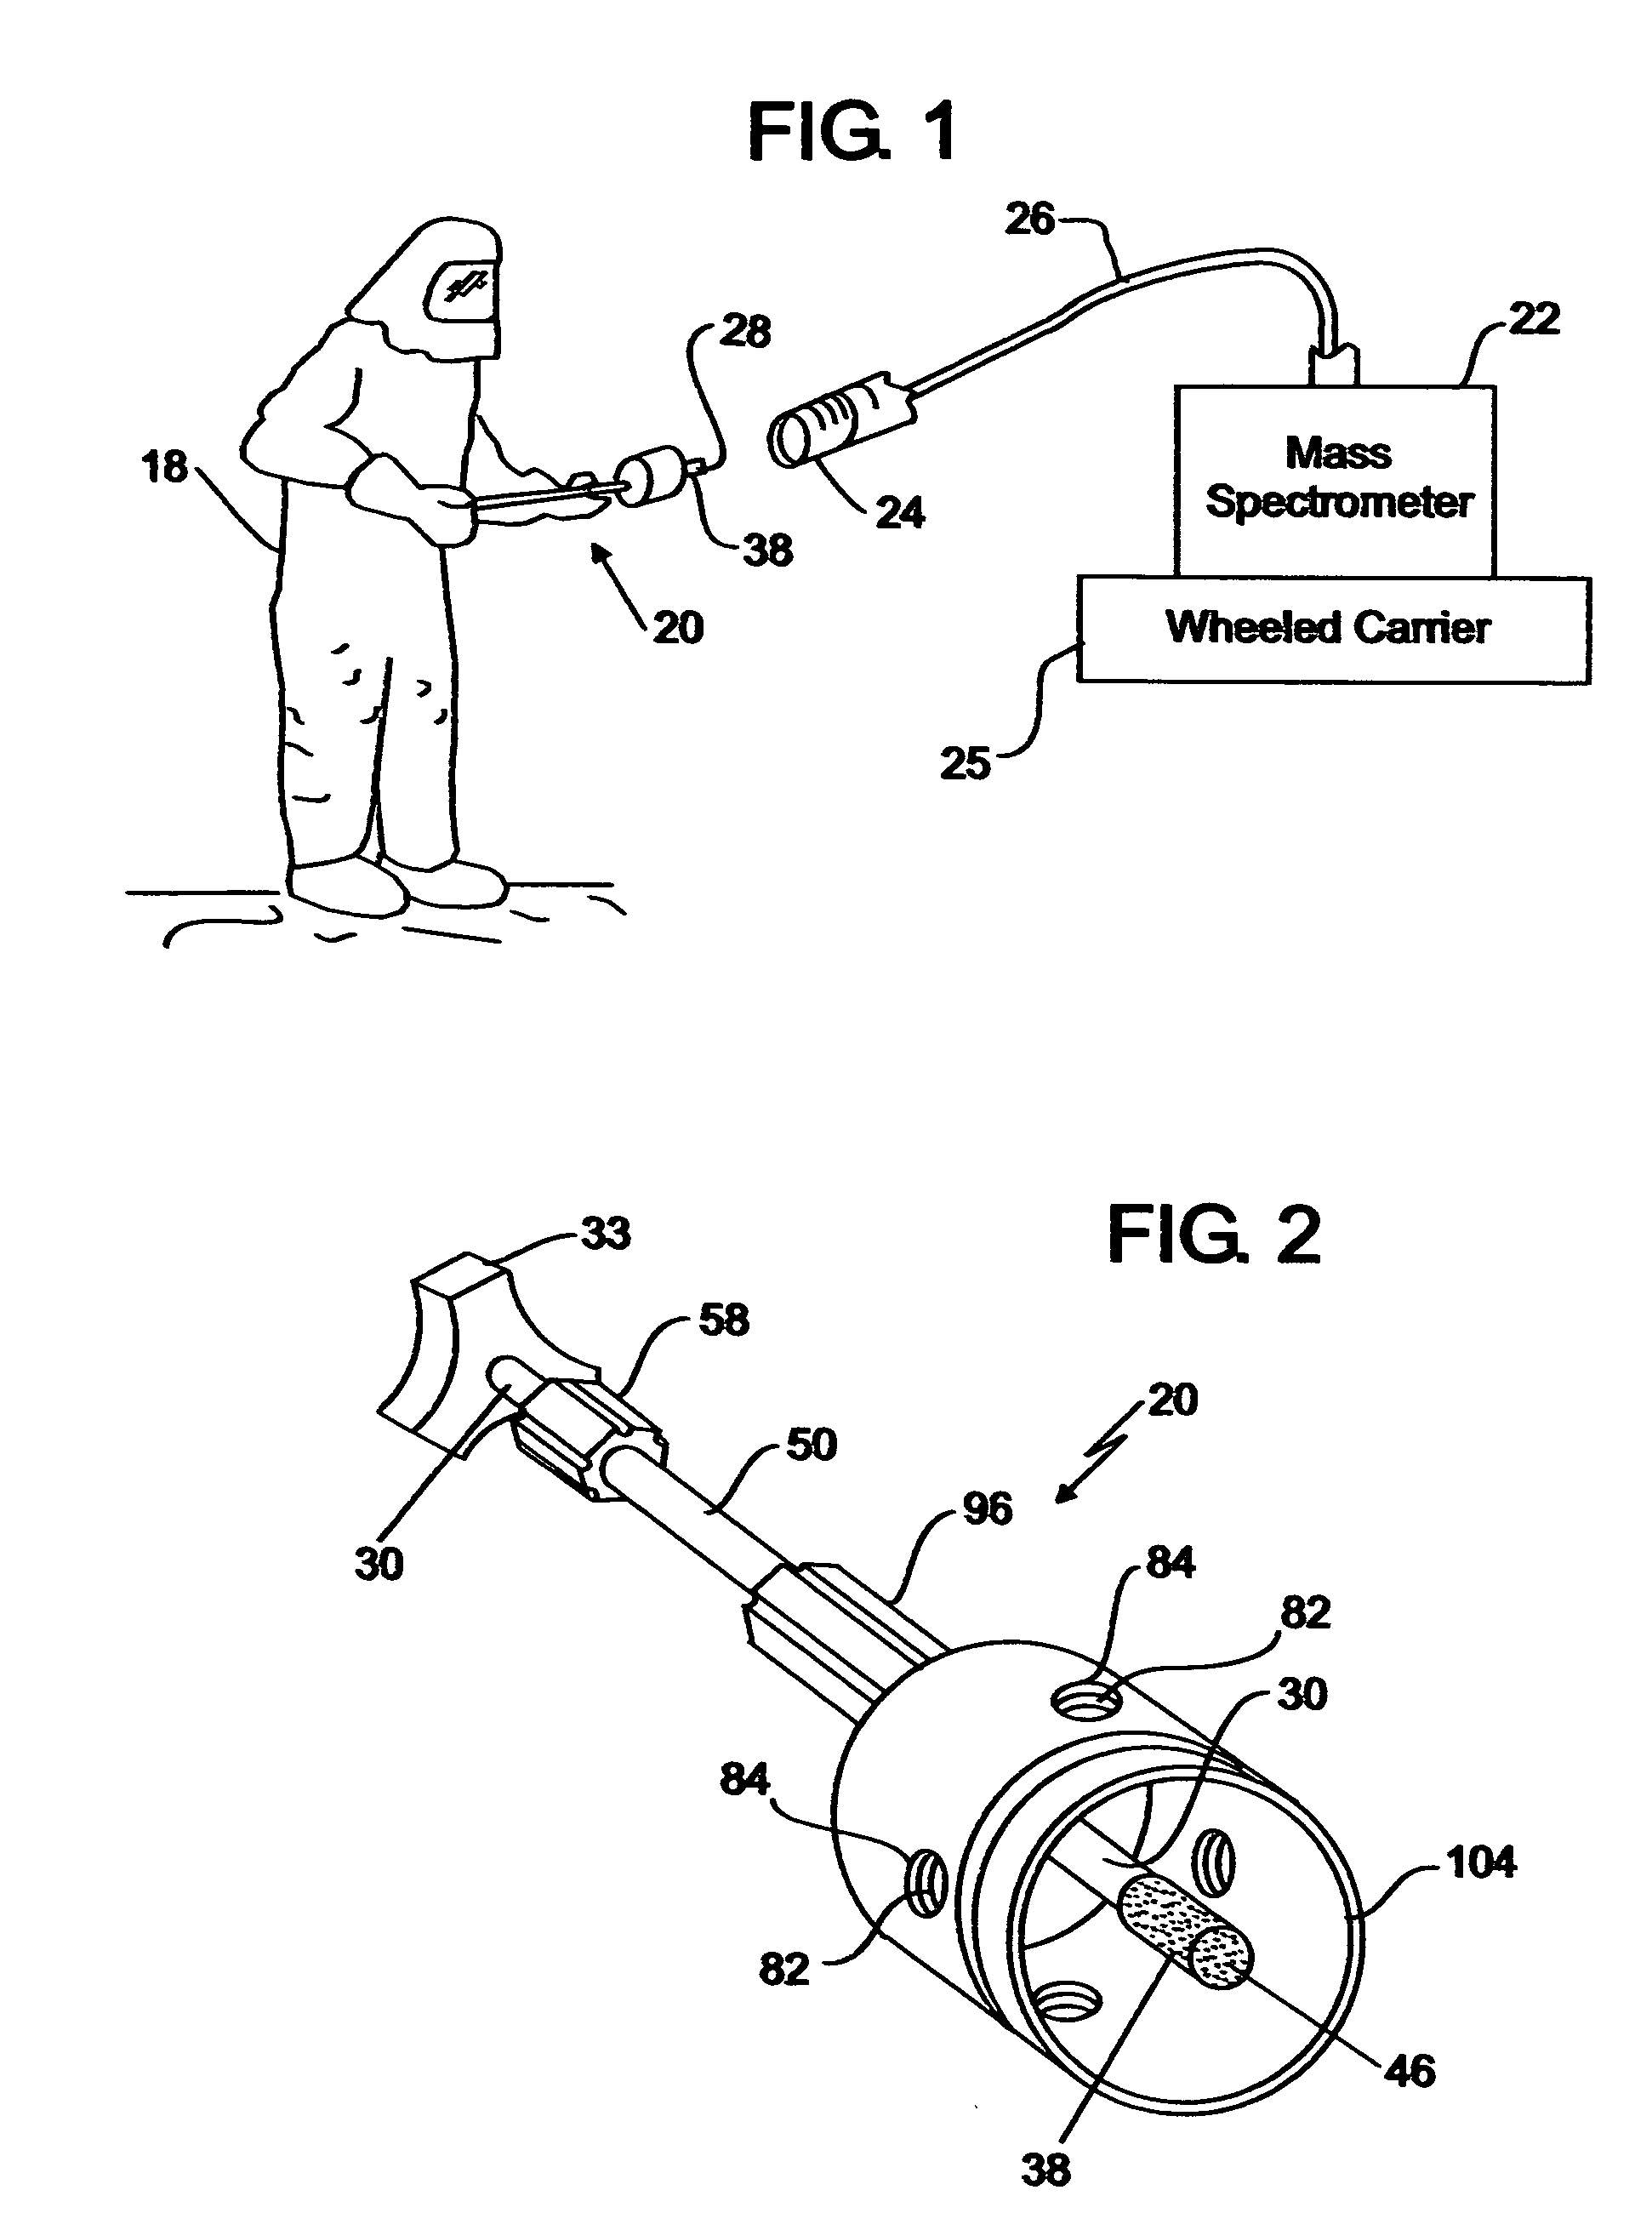 Assembly for collecting samples for purposes of identification or analysis and method of use